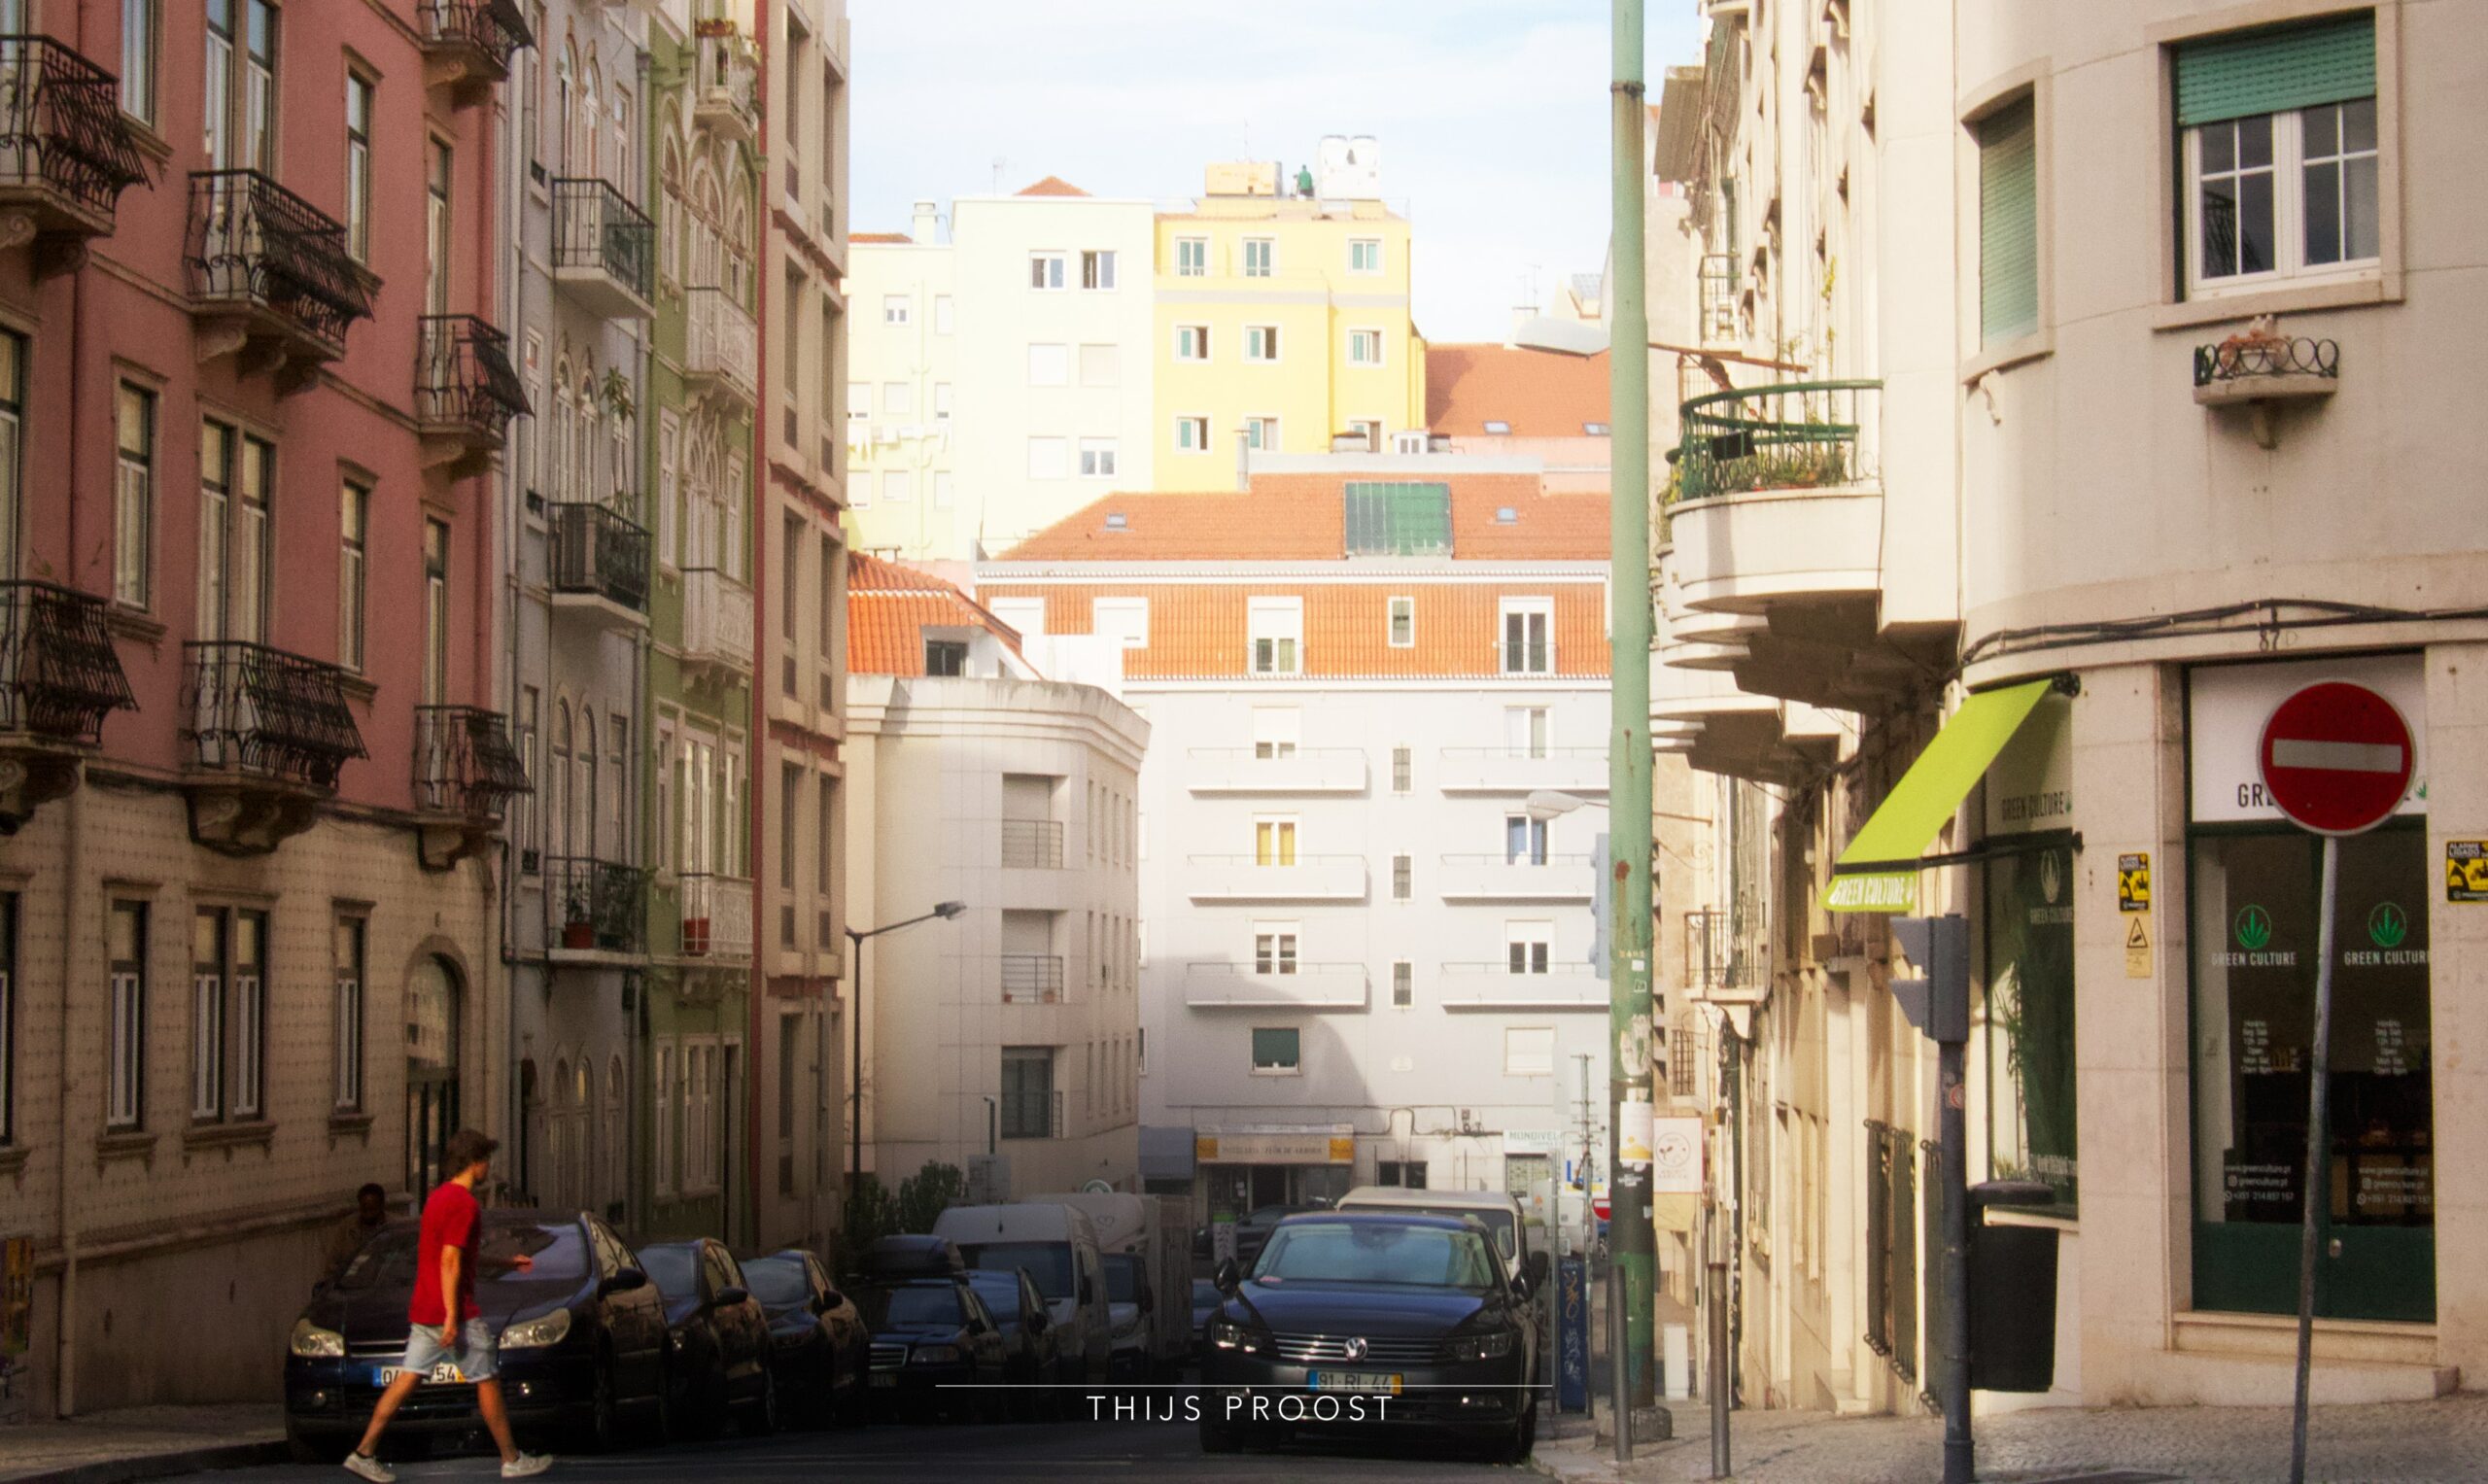 A man crosses a street in the center of Lisbon. Light false at the buildings at the end of the street. Cars are parked at the sides of the road.